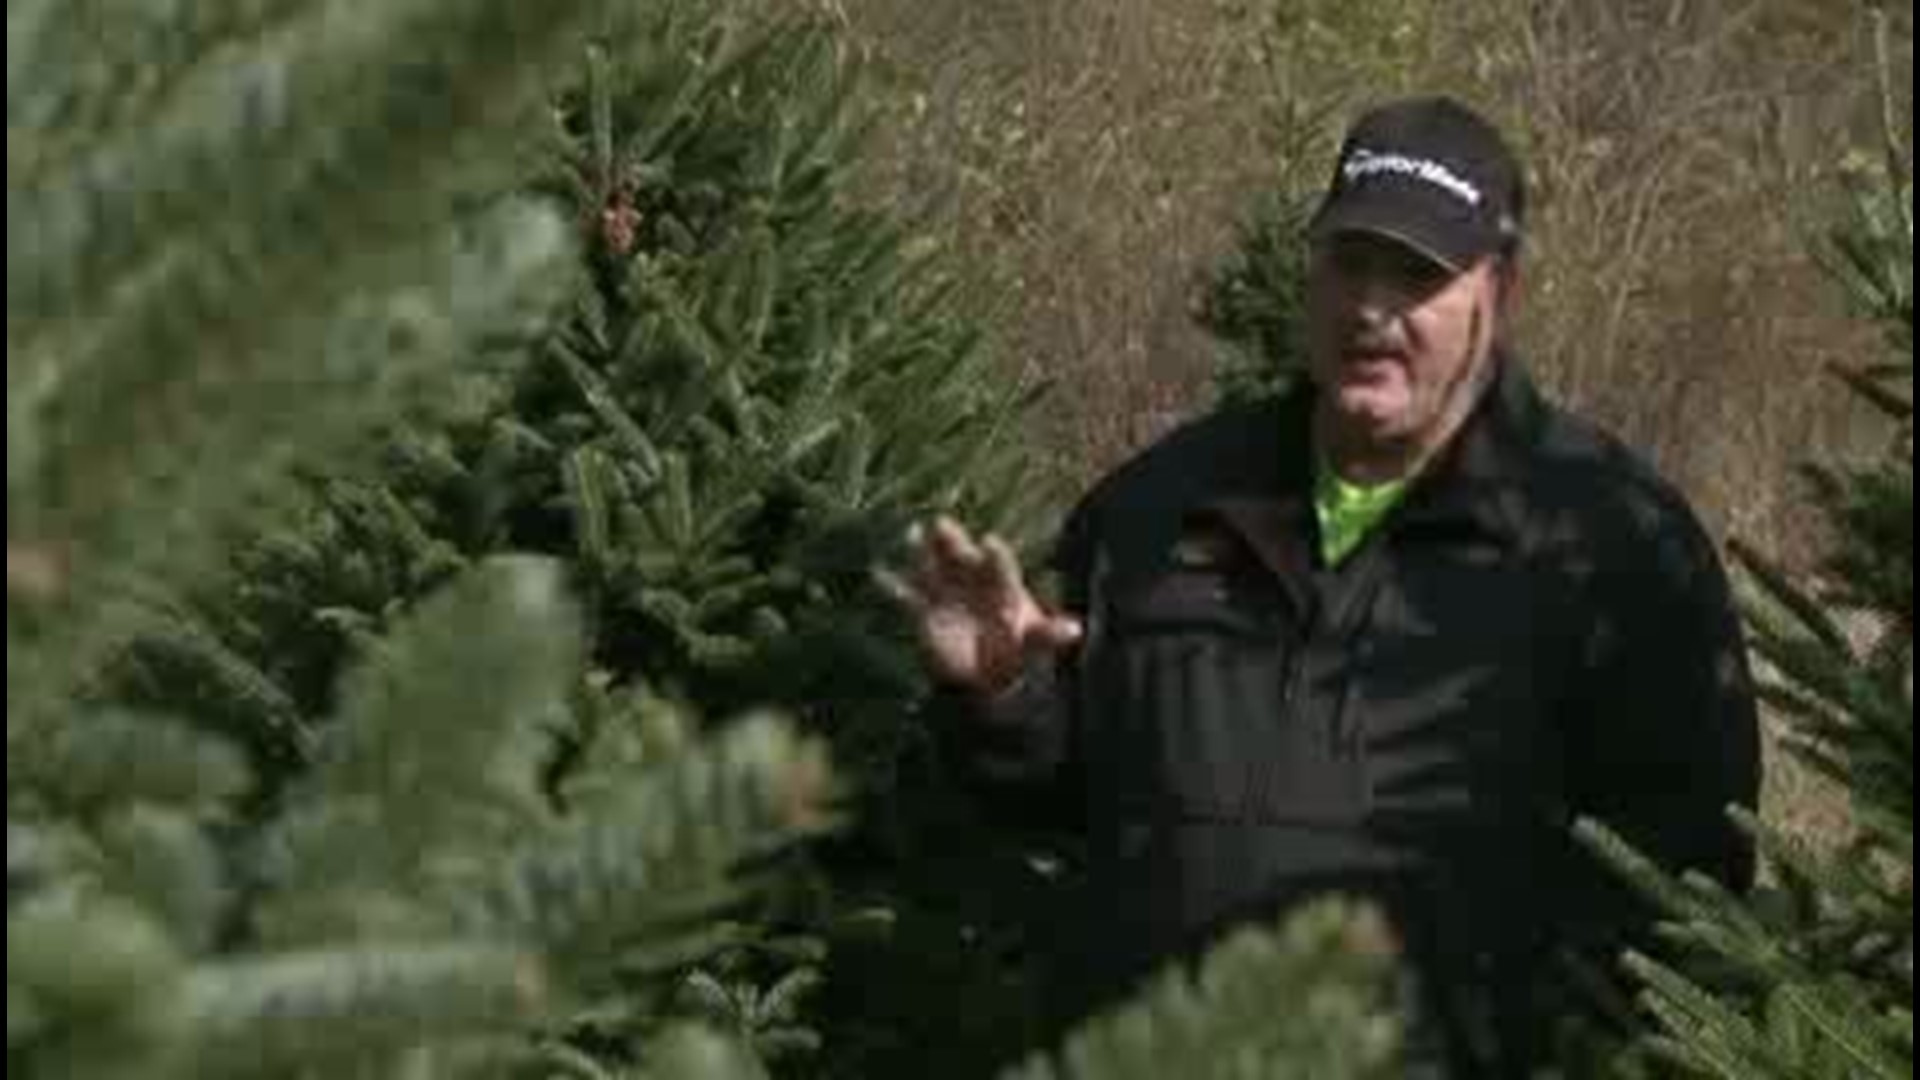 Farm trades Christmas trees for corn and soybeans